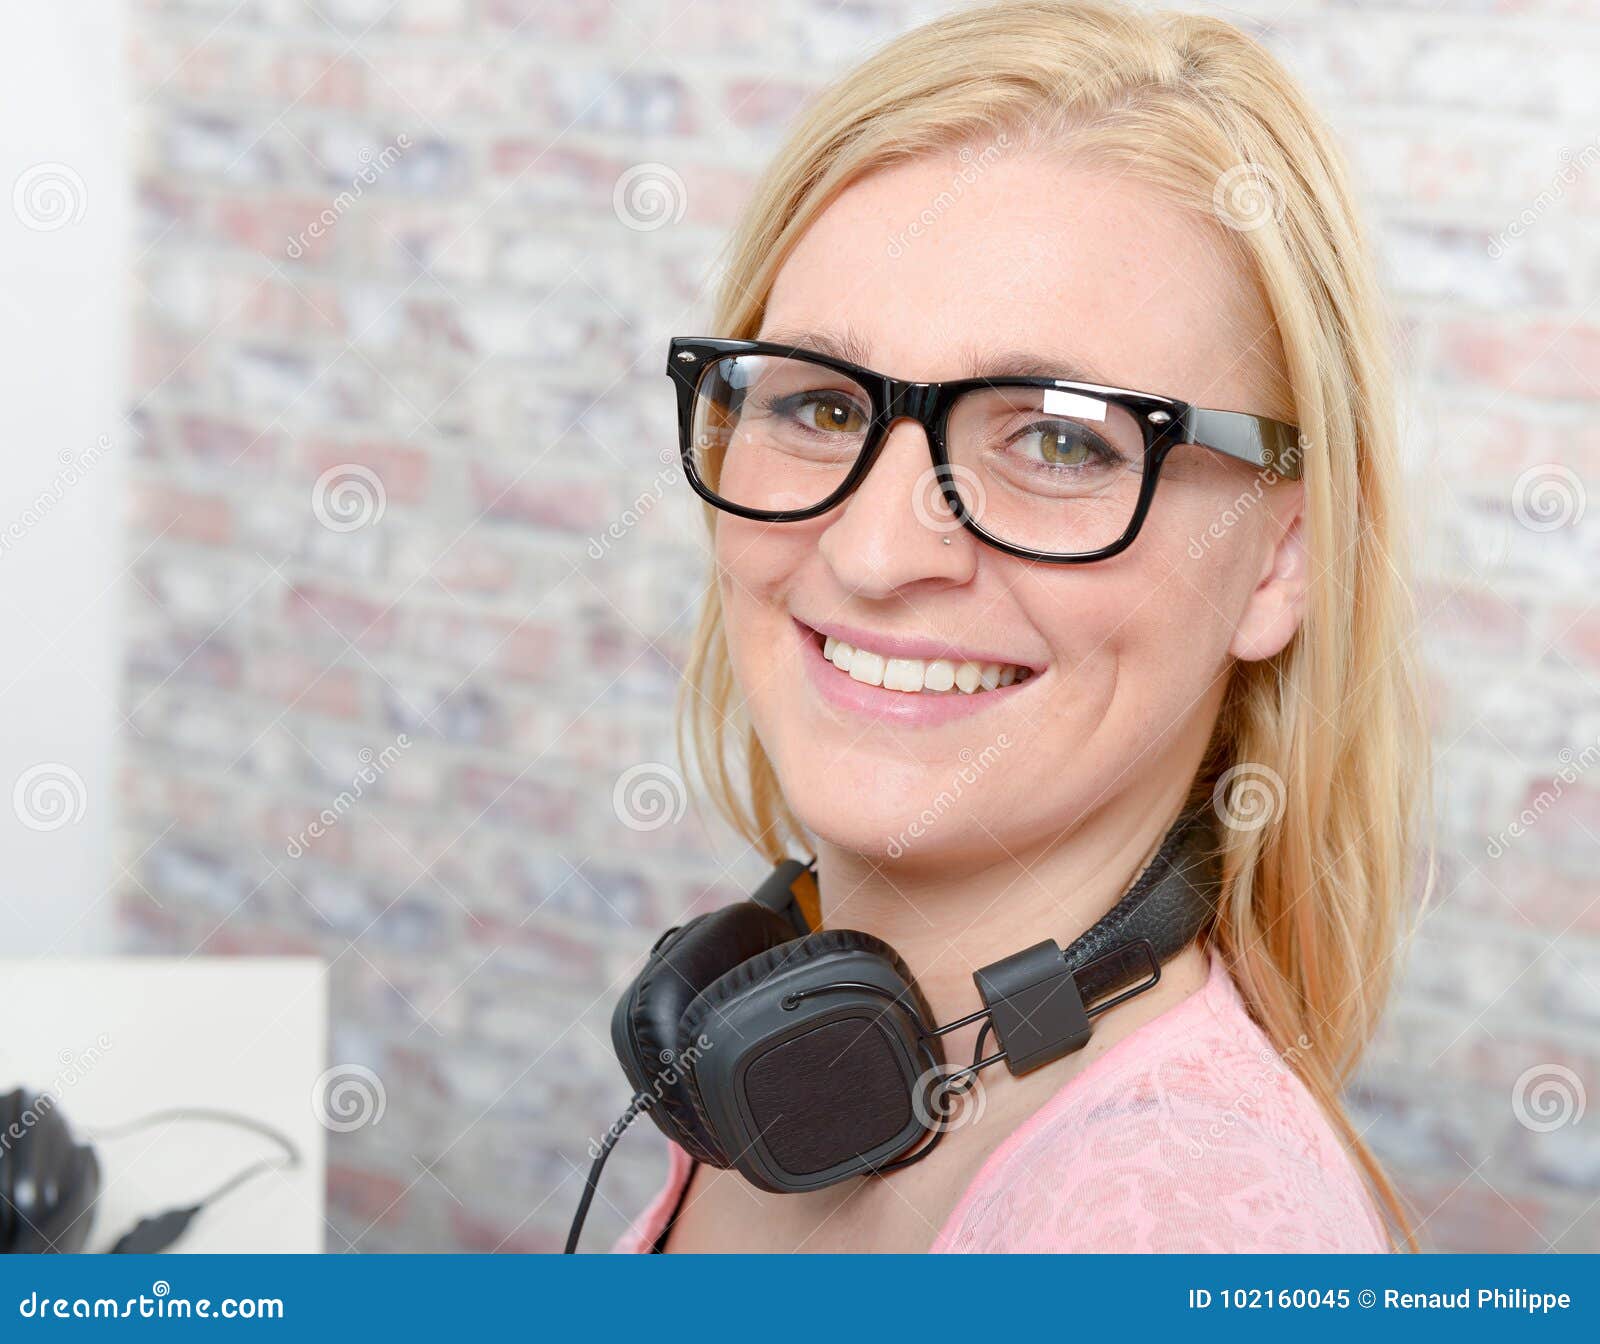 Portrait Of A Beautiful Blonde Smiling With Glasses Stock Image Image